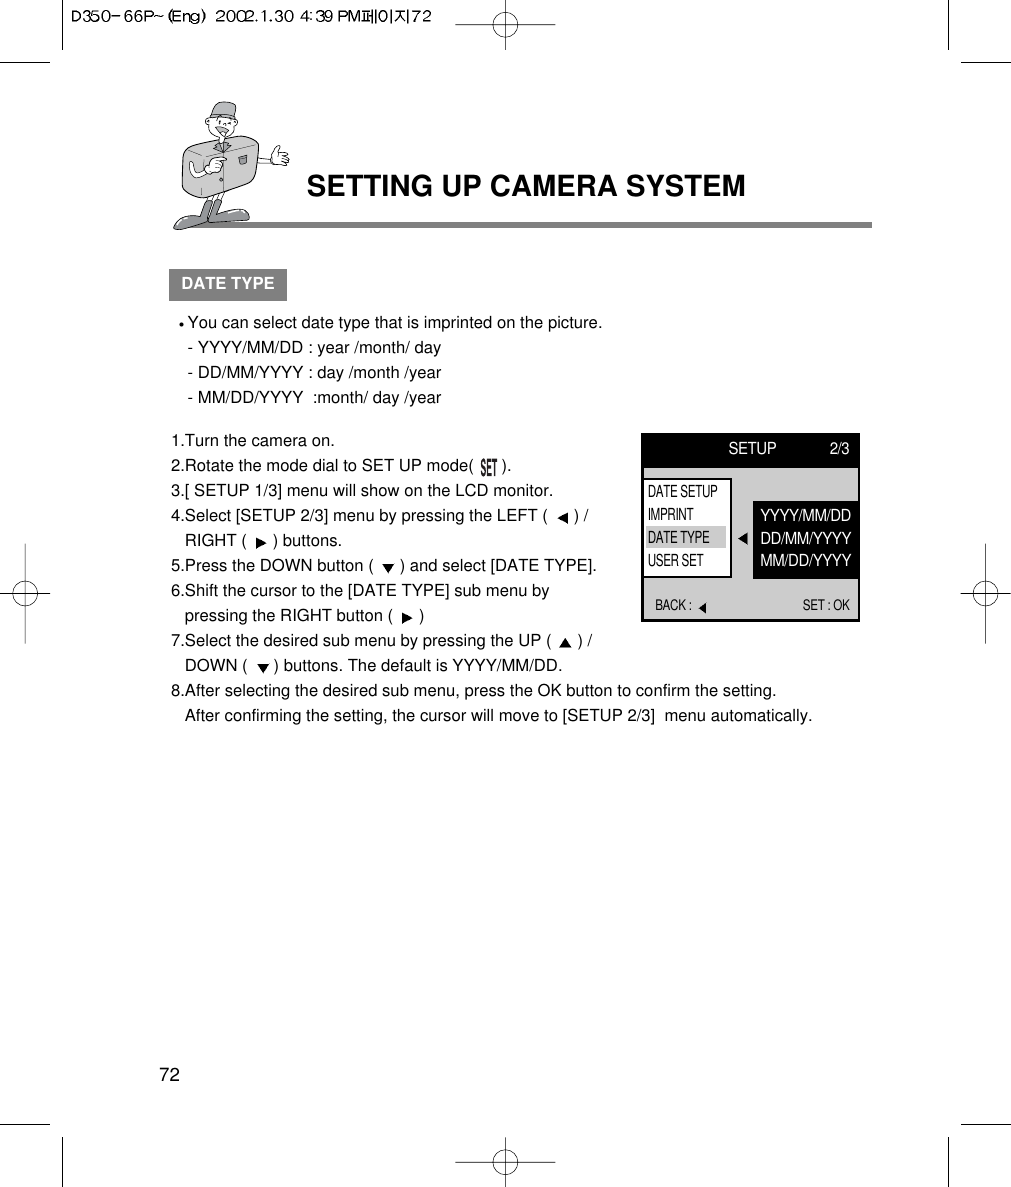 72SETTING UP CAMERA SYSTEMDATE TYPEYou can select date type that is imprinted on the picture.- YYYY/MM/DD : year /month/ day- DD/MM/YYYY : day /month /year- MM/DD/YYYY  :month/ day /year1.Turn the camera on.2.Rotate the mode dial to SET UP mode(      ).3.[ SETUP 1/3] menu will show on the LCD monitor.4.Select [SETUP 2/3] menu by pressing the LEFT (  ) /RIGHT (  ) buttons.5.Press the DOWN button (  ) and select [DATE TYPE].6.Shift the cursor to the [DATE TYPE] sub menu bypressing the RIGHT button (  ) 7.Select the desired sub menu by pressing the UP (  ) /DOWN (  ) buttons. The default is YYYY/MM/DD.8.After selecting the desired sub menu, press the OK button to confirm the setting. After confirming the setting, the cursor will move to [SETUP 2/3]  menu automatically.SETUP 2/3BACK :  SET : OKYYYY/MM/DDDD/MM/YYYYMM/DD/YYYYDATE SETUPIMPRINTDATE TYPEUSER SET